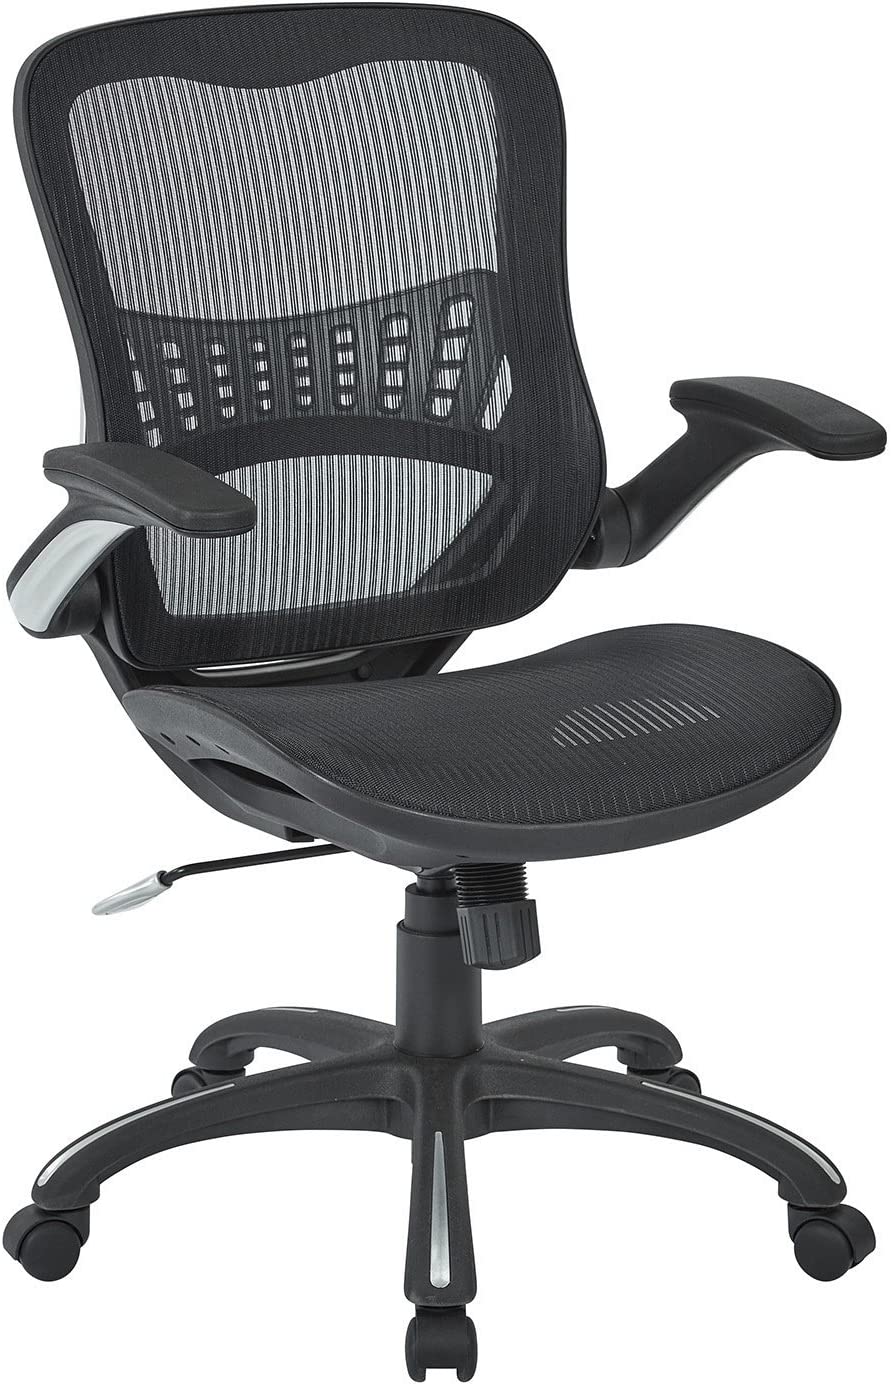 Best chairs for lower back pain promise comfort and supreme